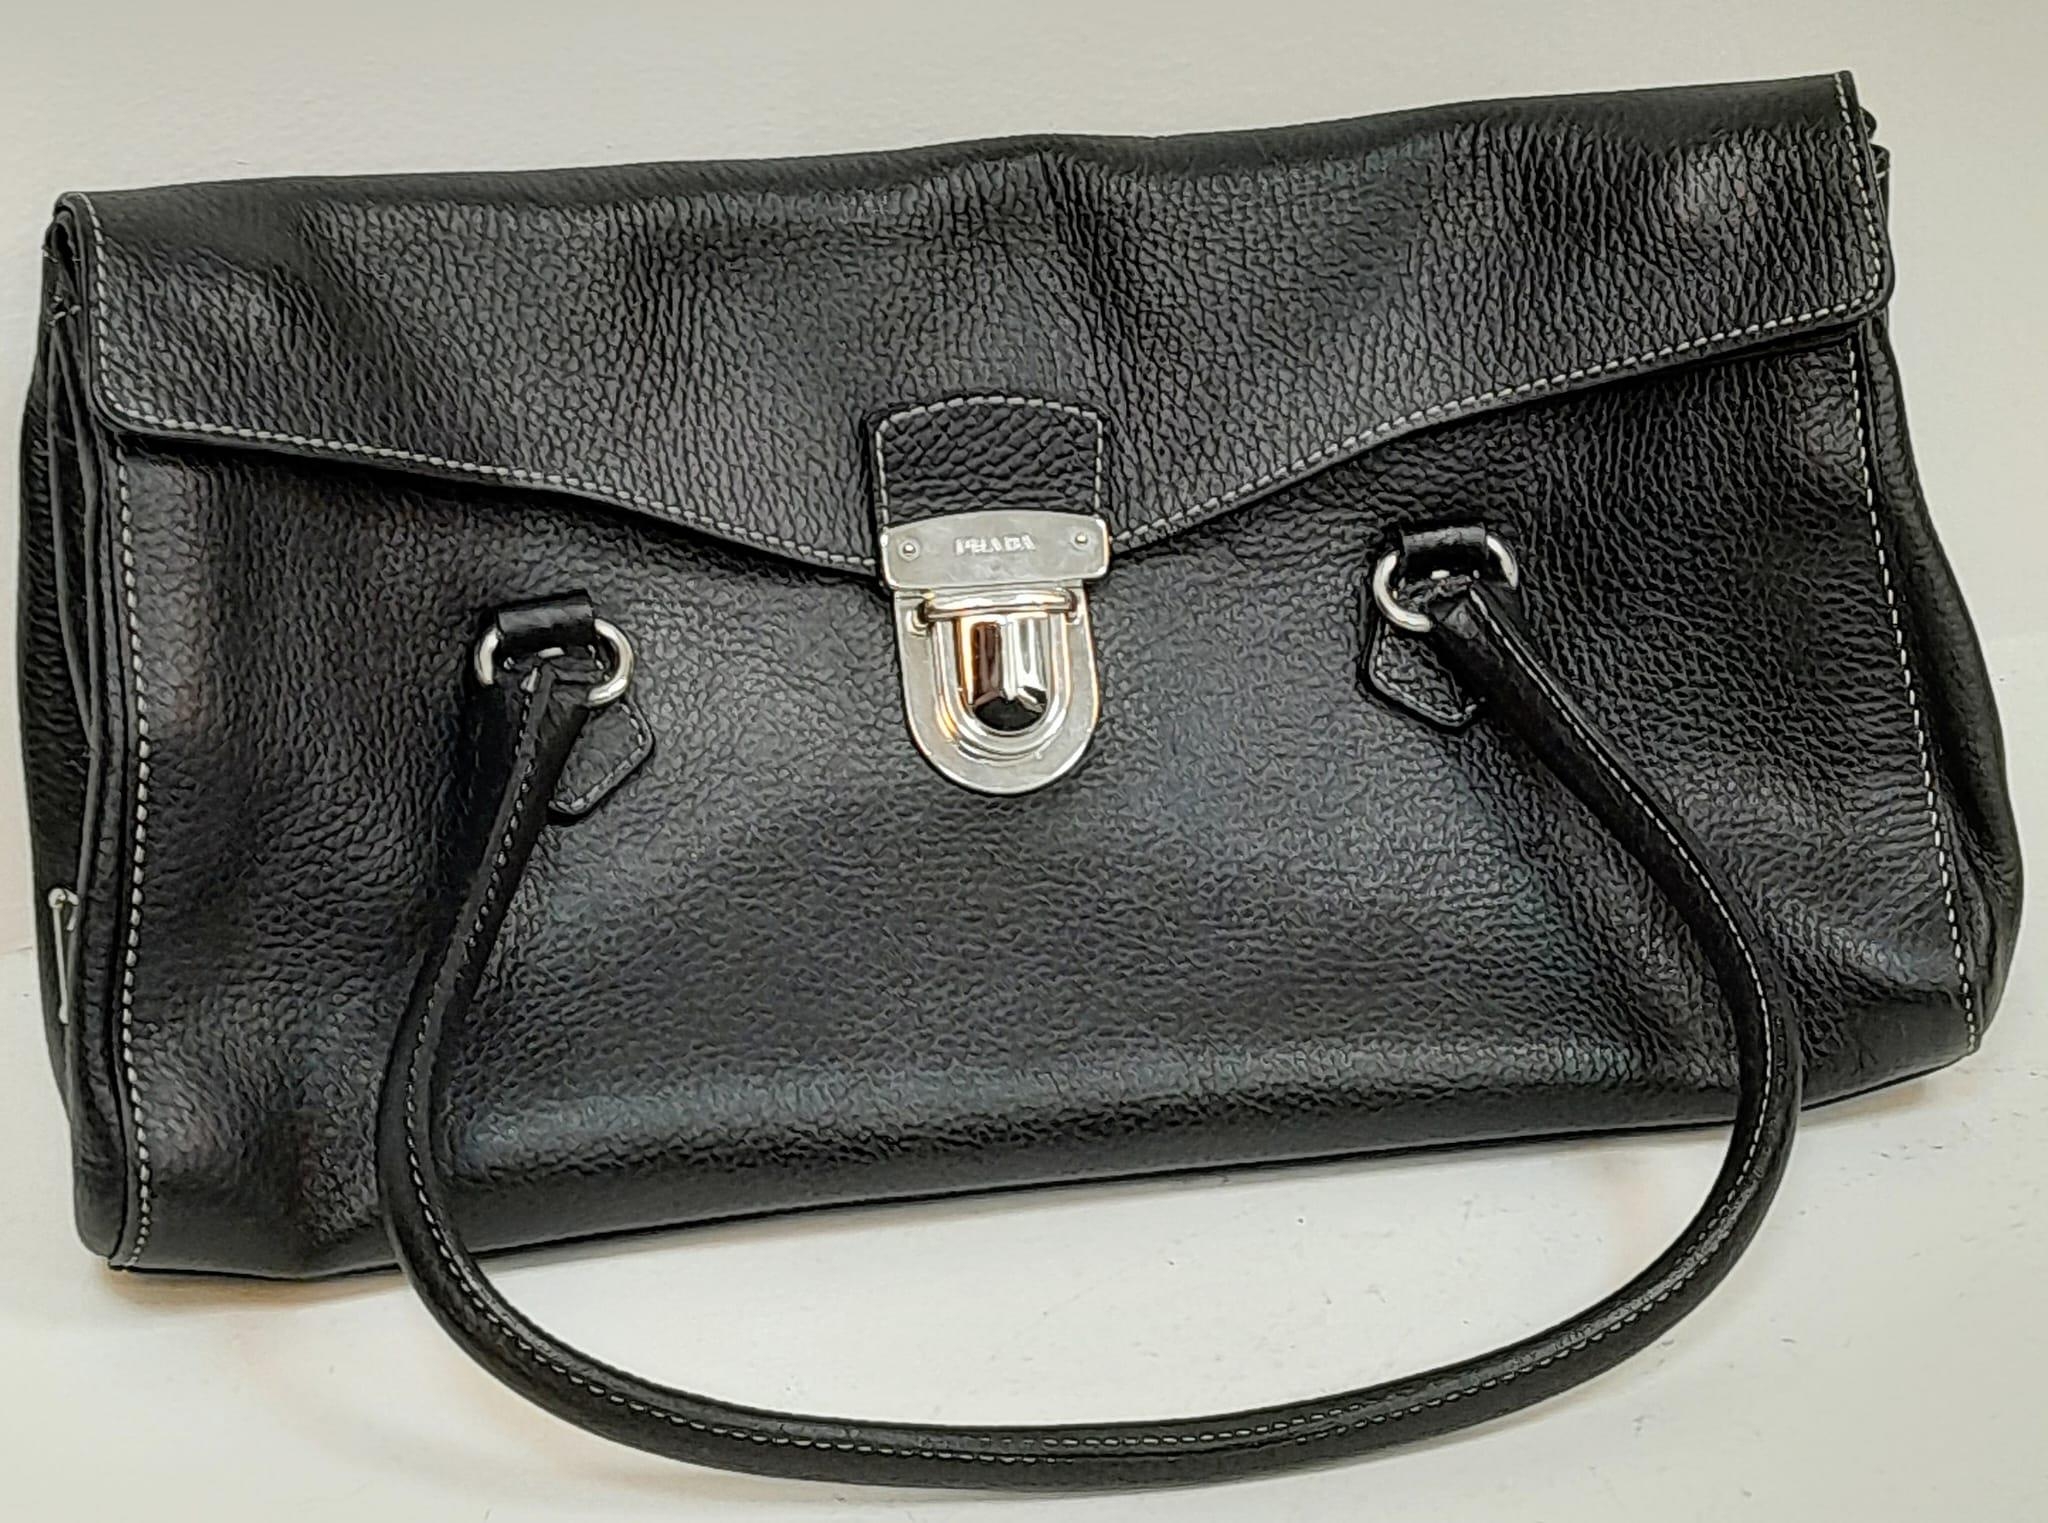 A Prada Black Shoulder Bag. Leather exterior with silver-toned hardware, two rolled leather